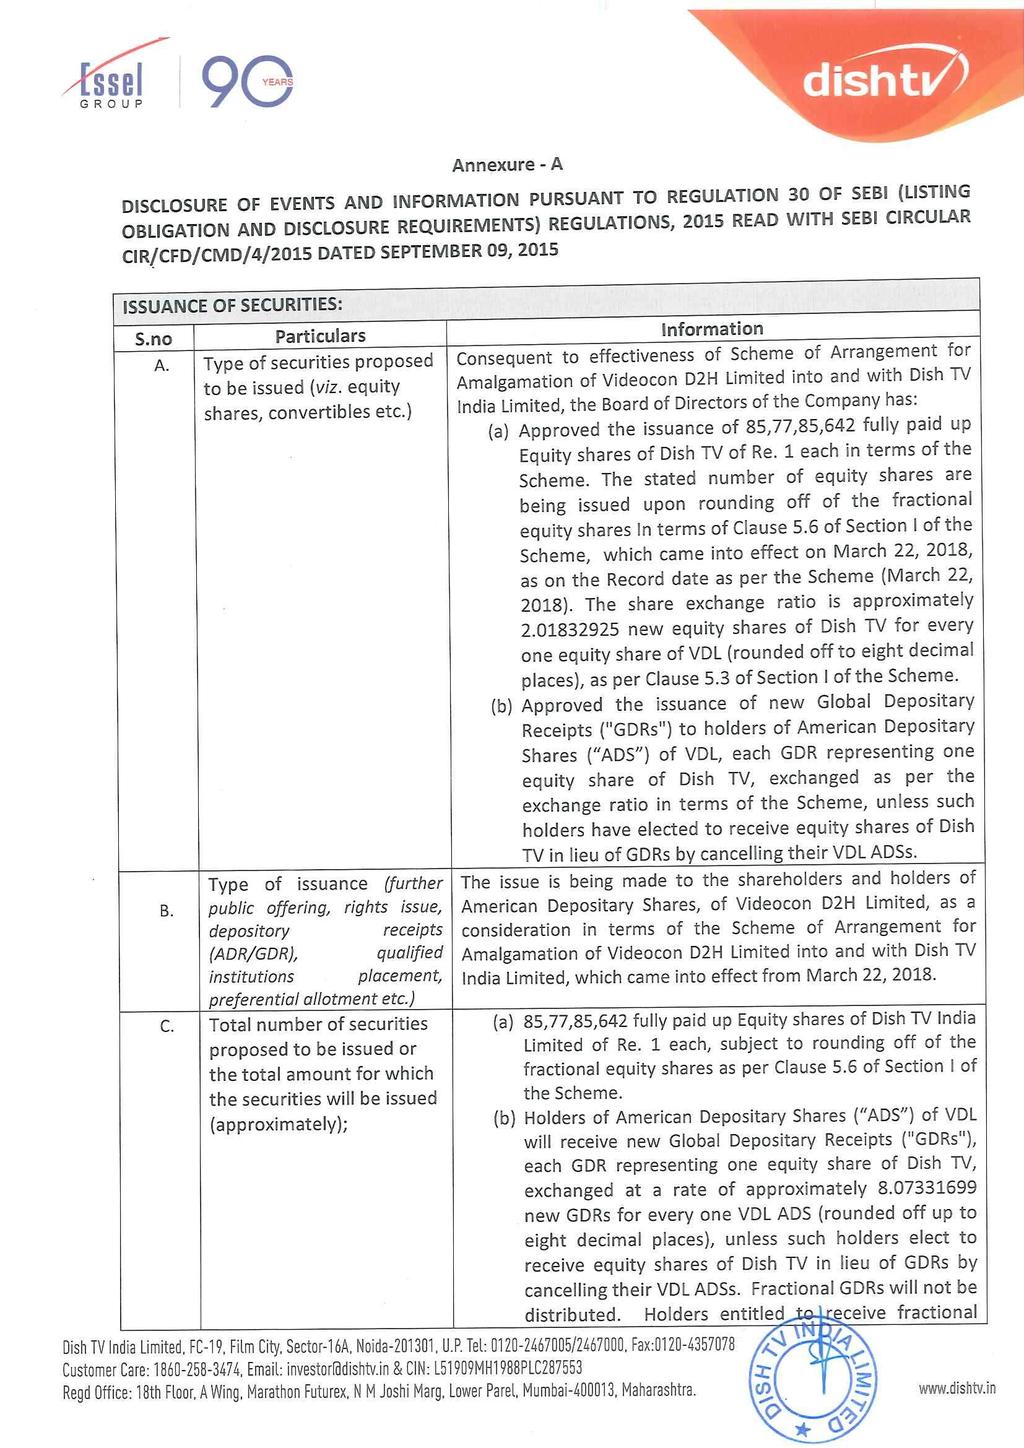 GROUP 9e Annexure - A DISCLOSURE OF EVENTS AND INFORMATION PURSUANT TO REGULATION 30 OF SEBI (LISTING OBLIGATION AND DISCLOSURE REQUIREMENTS) REGULATIONS, 2015 READ WITH SEBI CIRCULAR